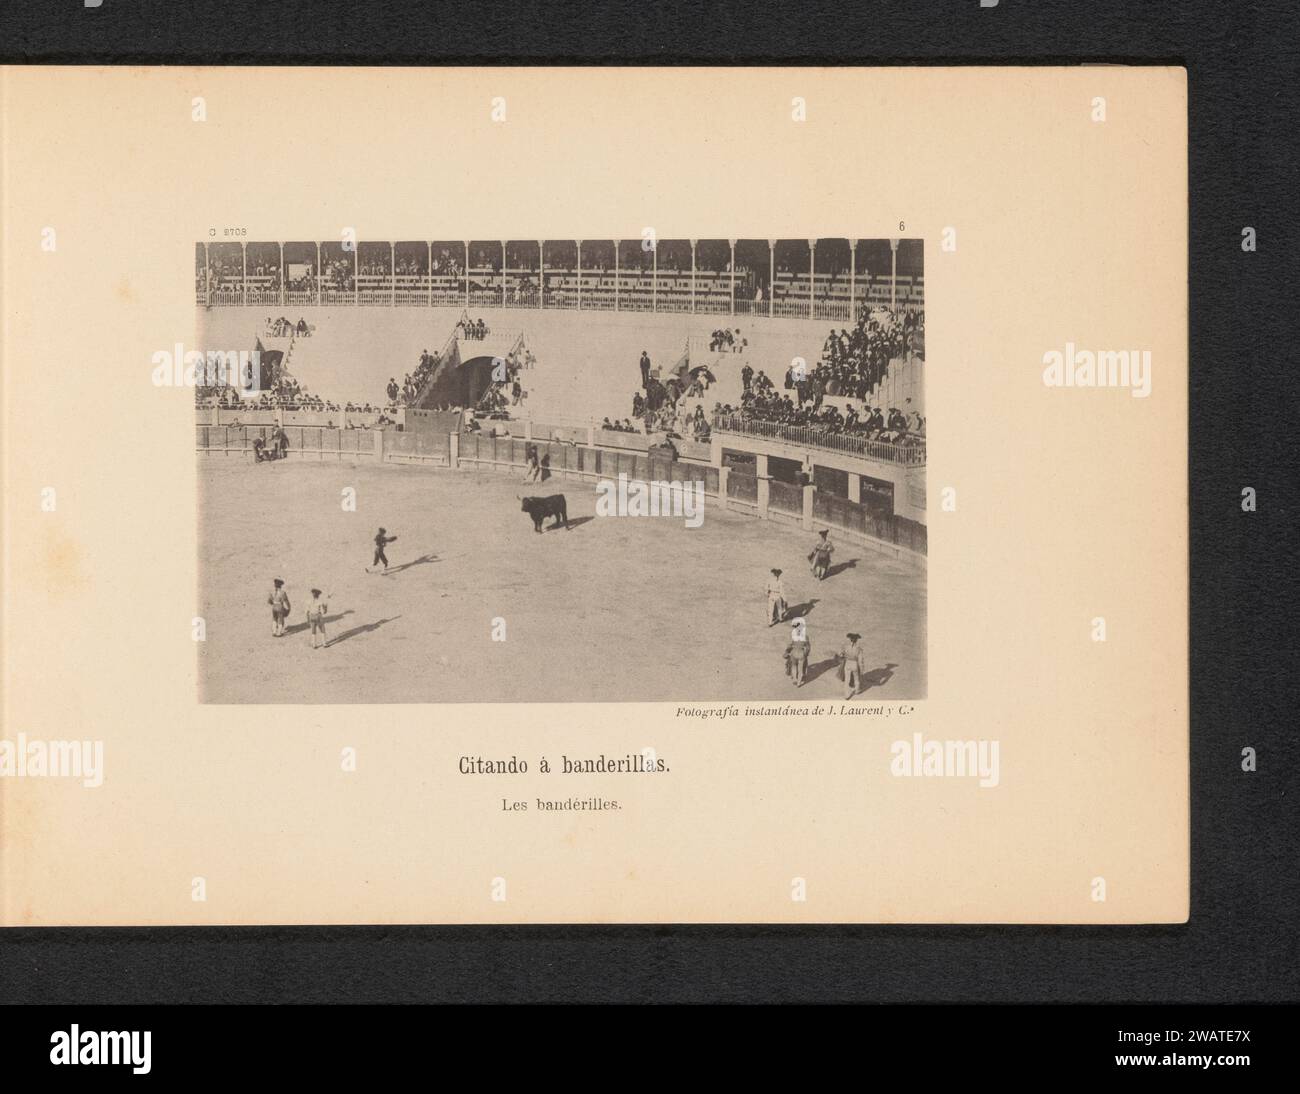 Banderilleros in a fight with a bull in the bullfighter arena of Carretera de Aragon in Madrid, Juan Laurent, c. 1880 - c. 1890 photomechanical print  Madrid paper collotype bullfight. theatre (building) - AA - open-air performances. bull-fighter, toreador Stock Photo